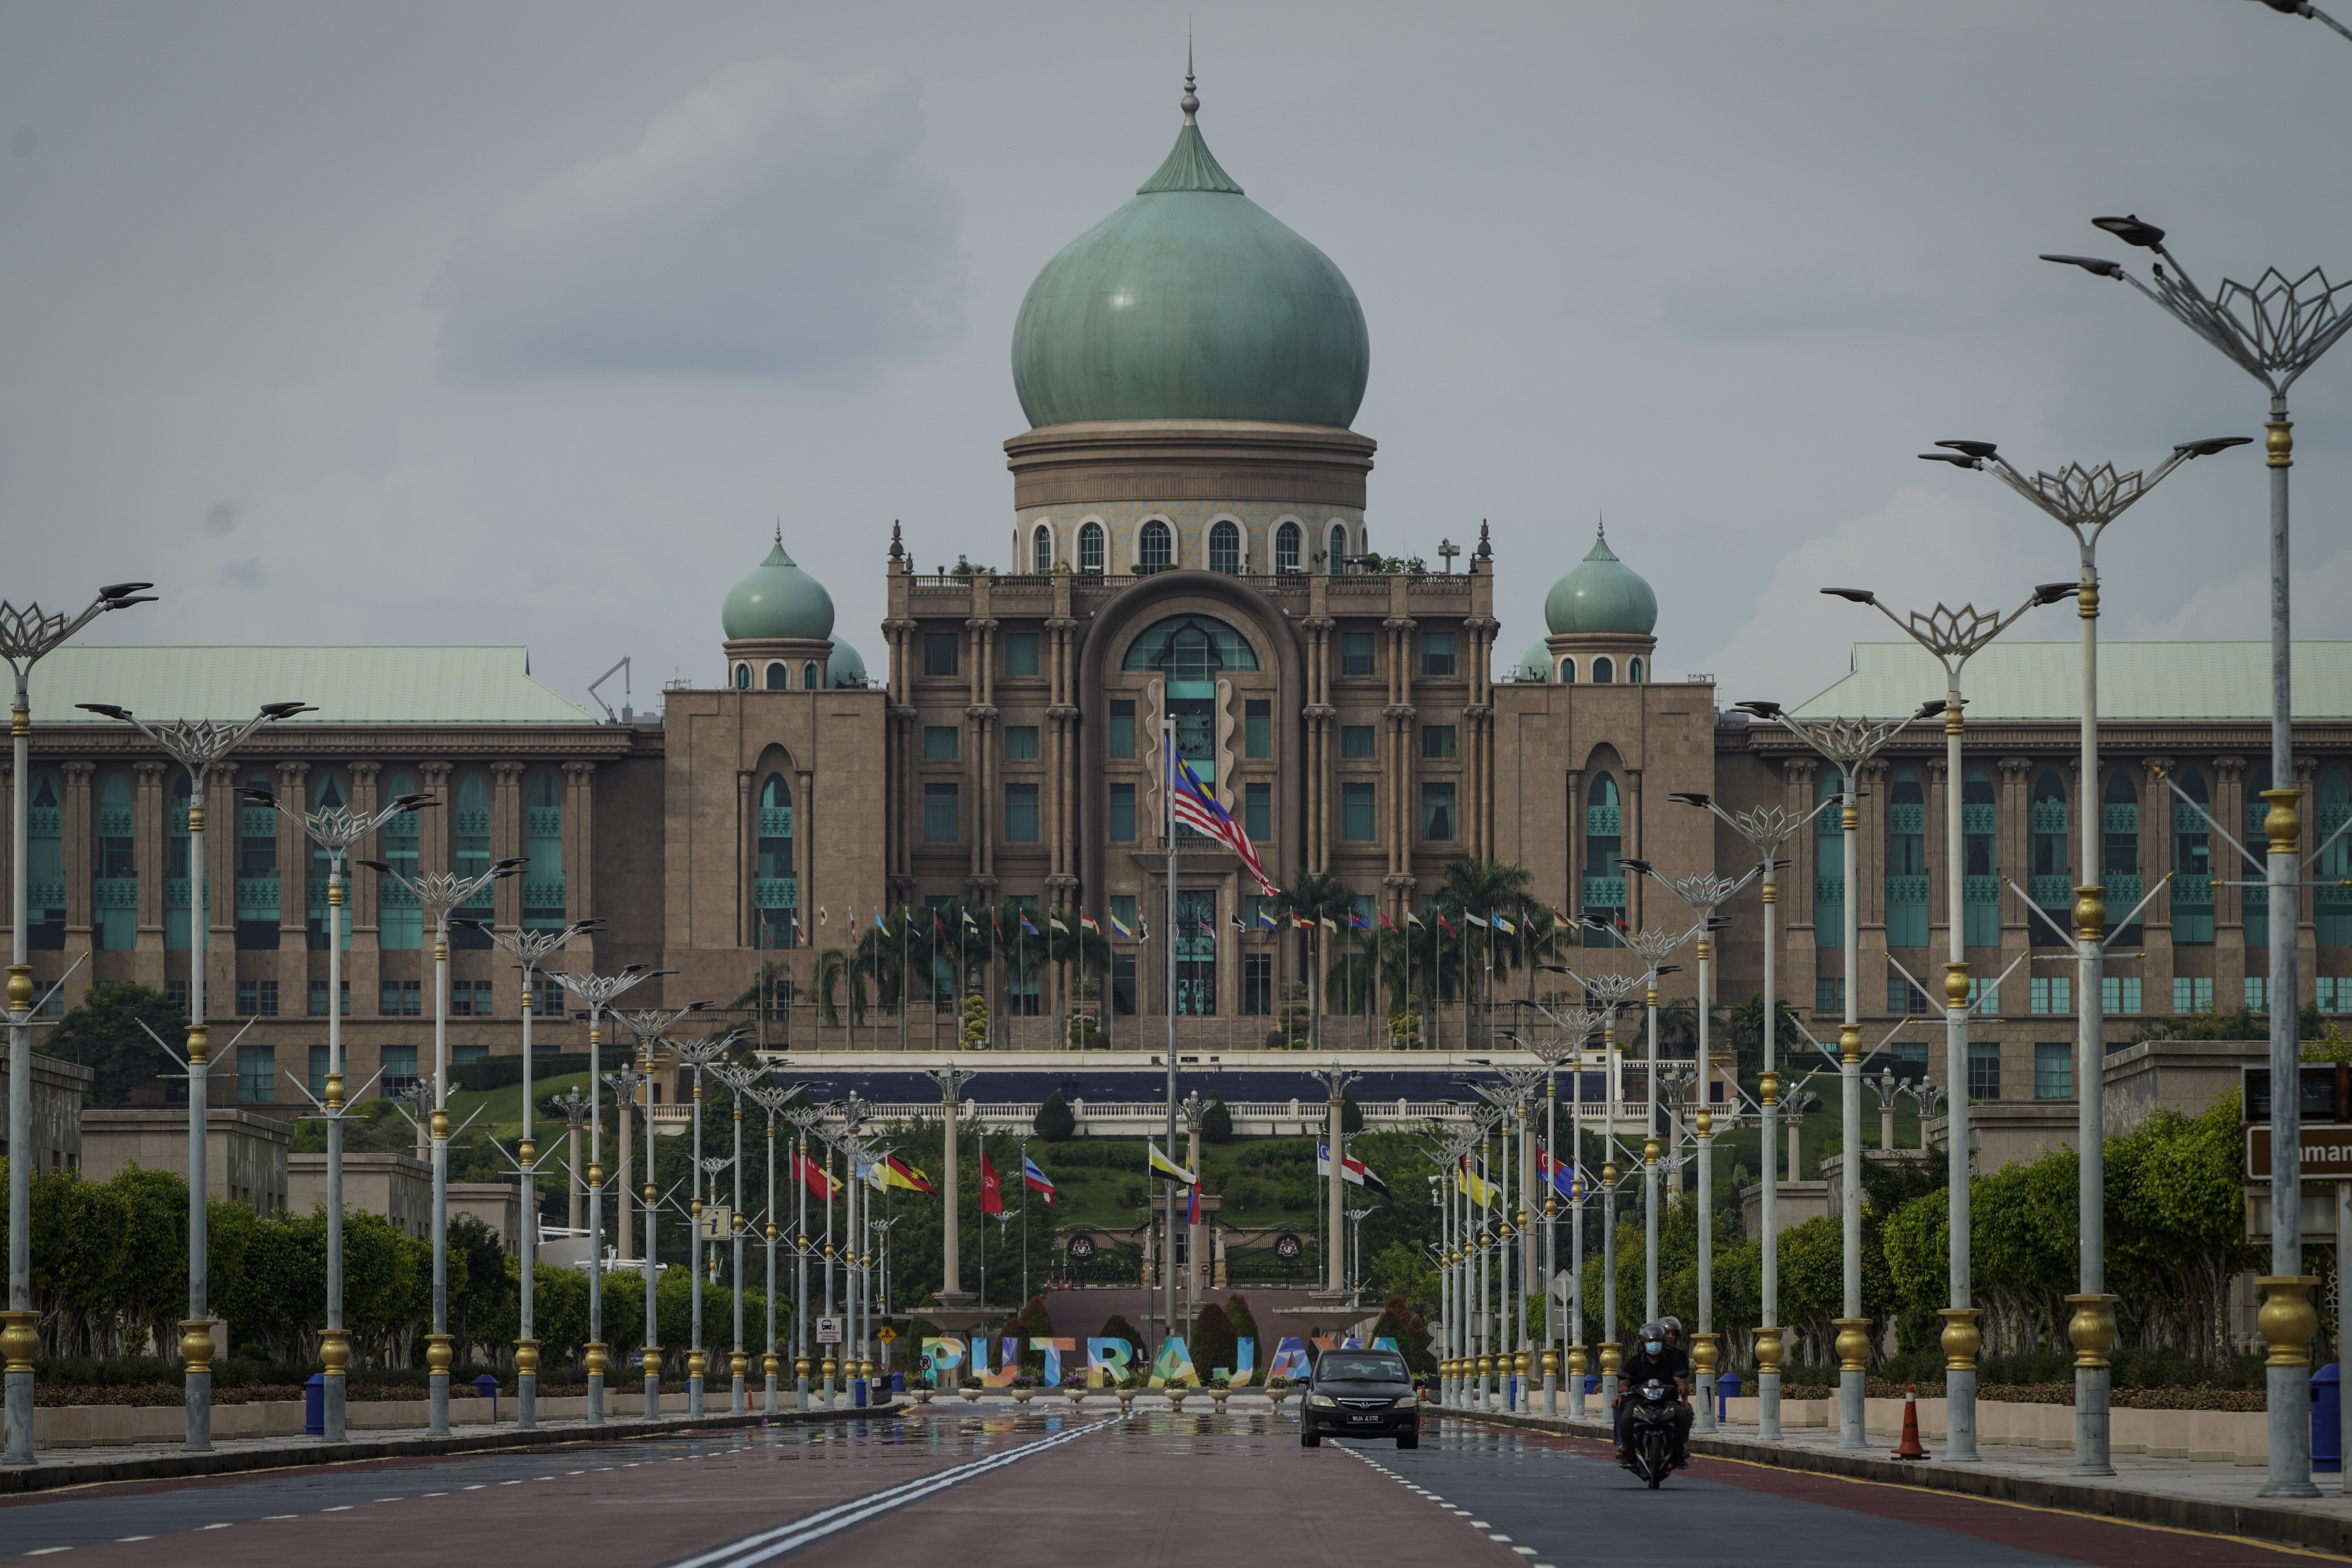 The prime minister's office building in Putrajaya, Malaysia. Photo: AP